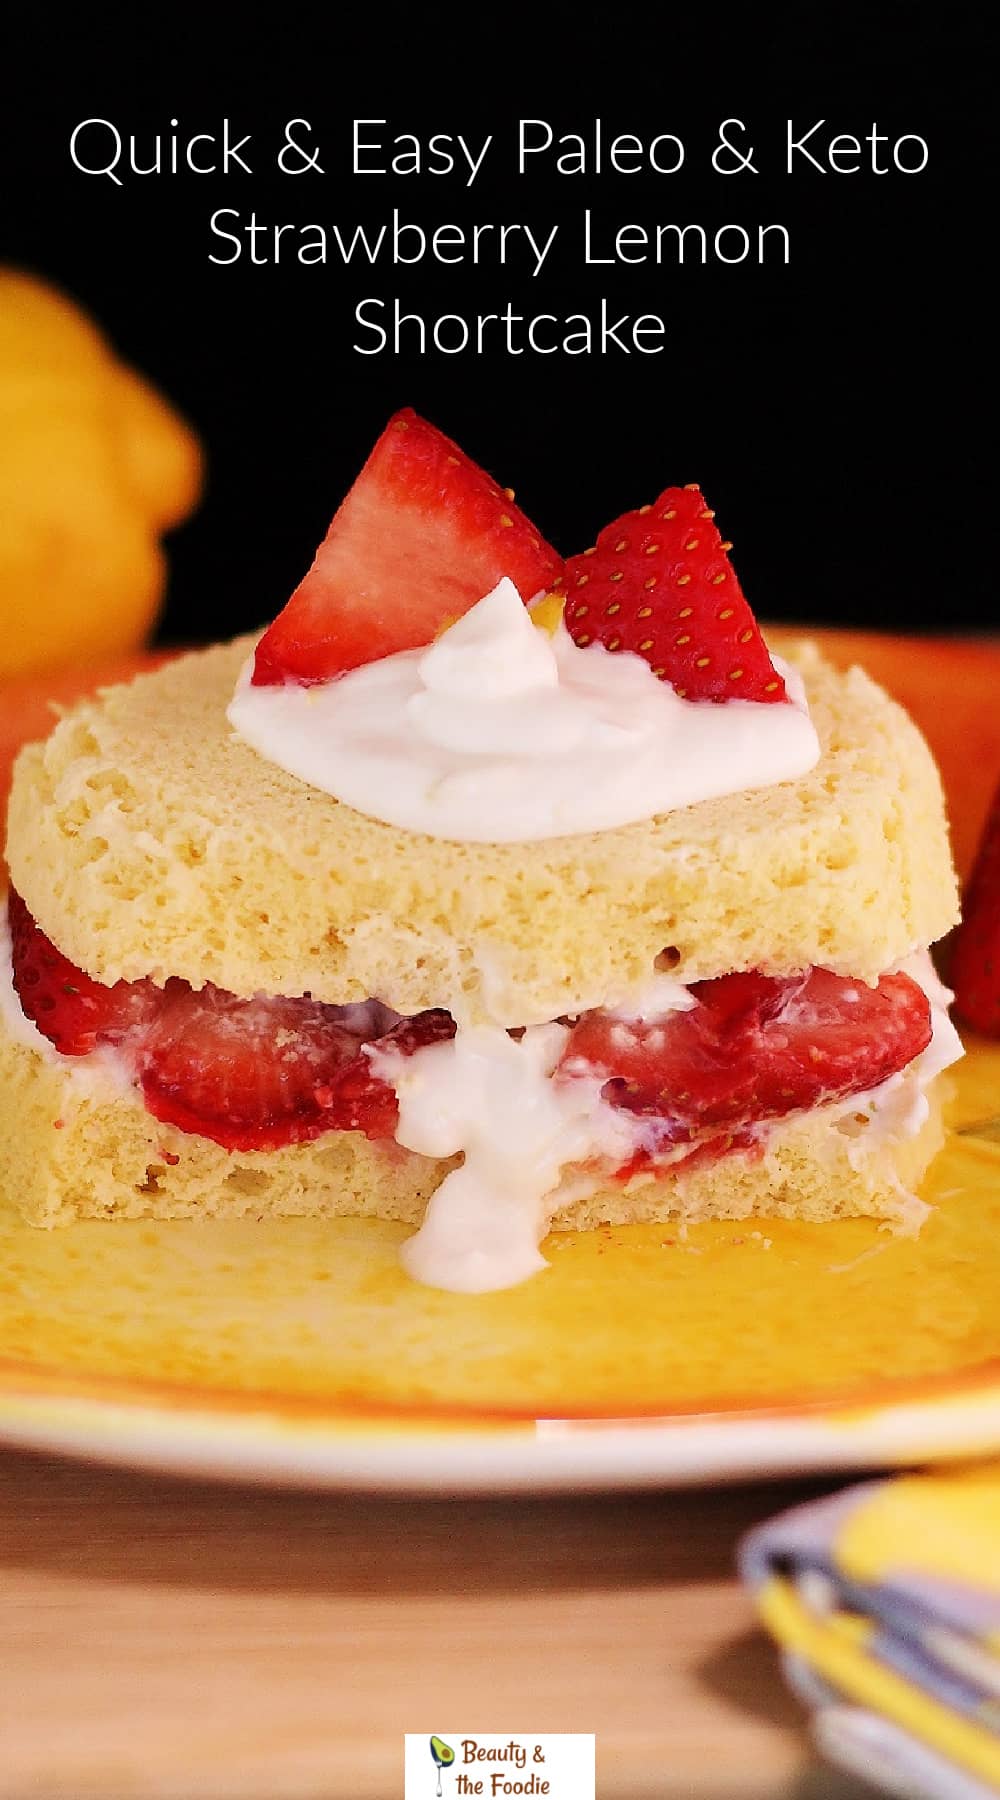 A quick & simple strawberry lemon shortcake with cream & berries.